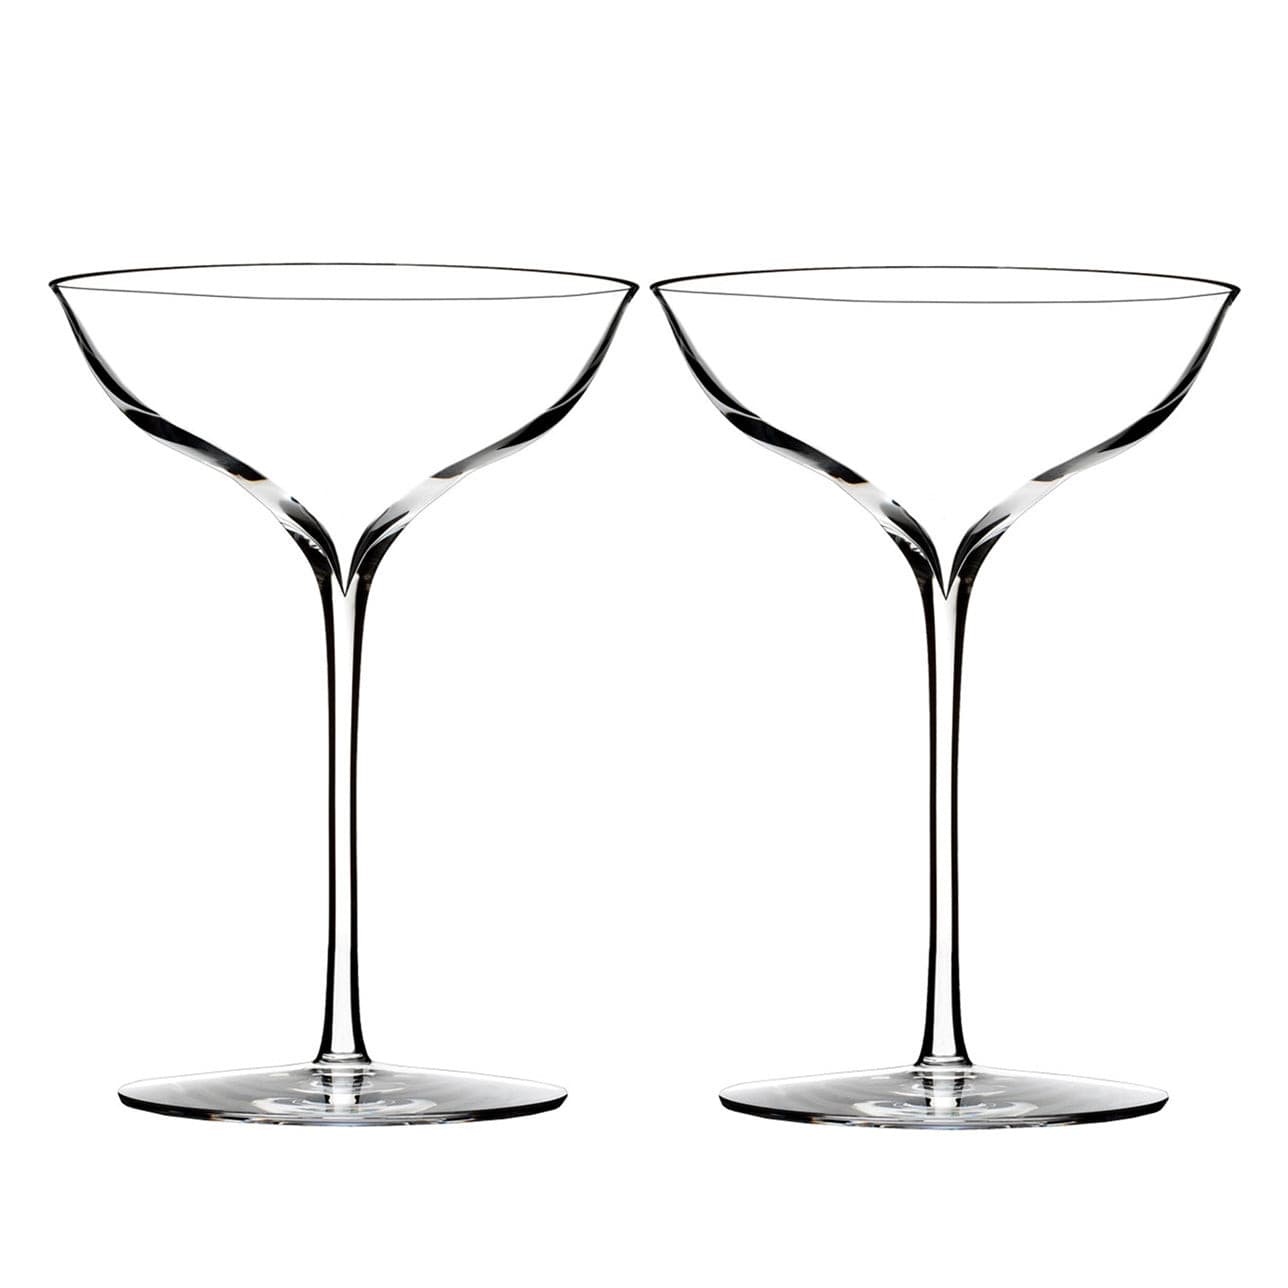 Waterford | Elegance Champagne Belle Coupe 7.8 Oz Set/2